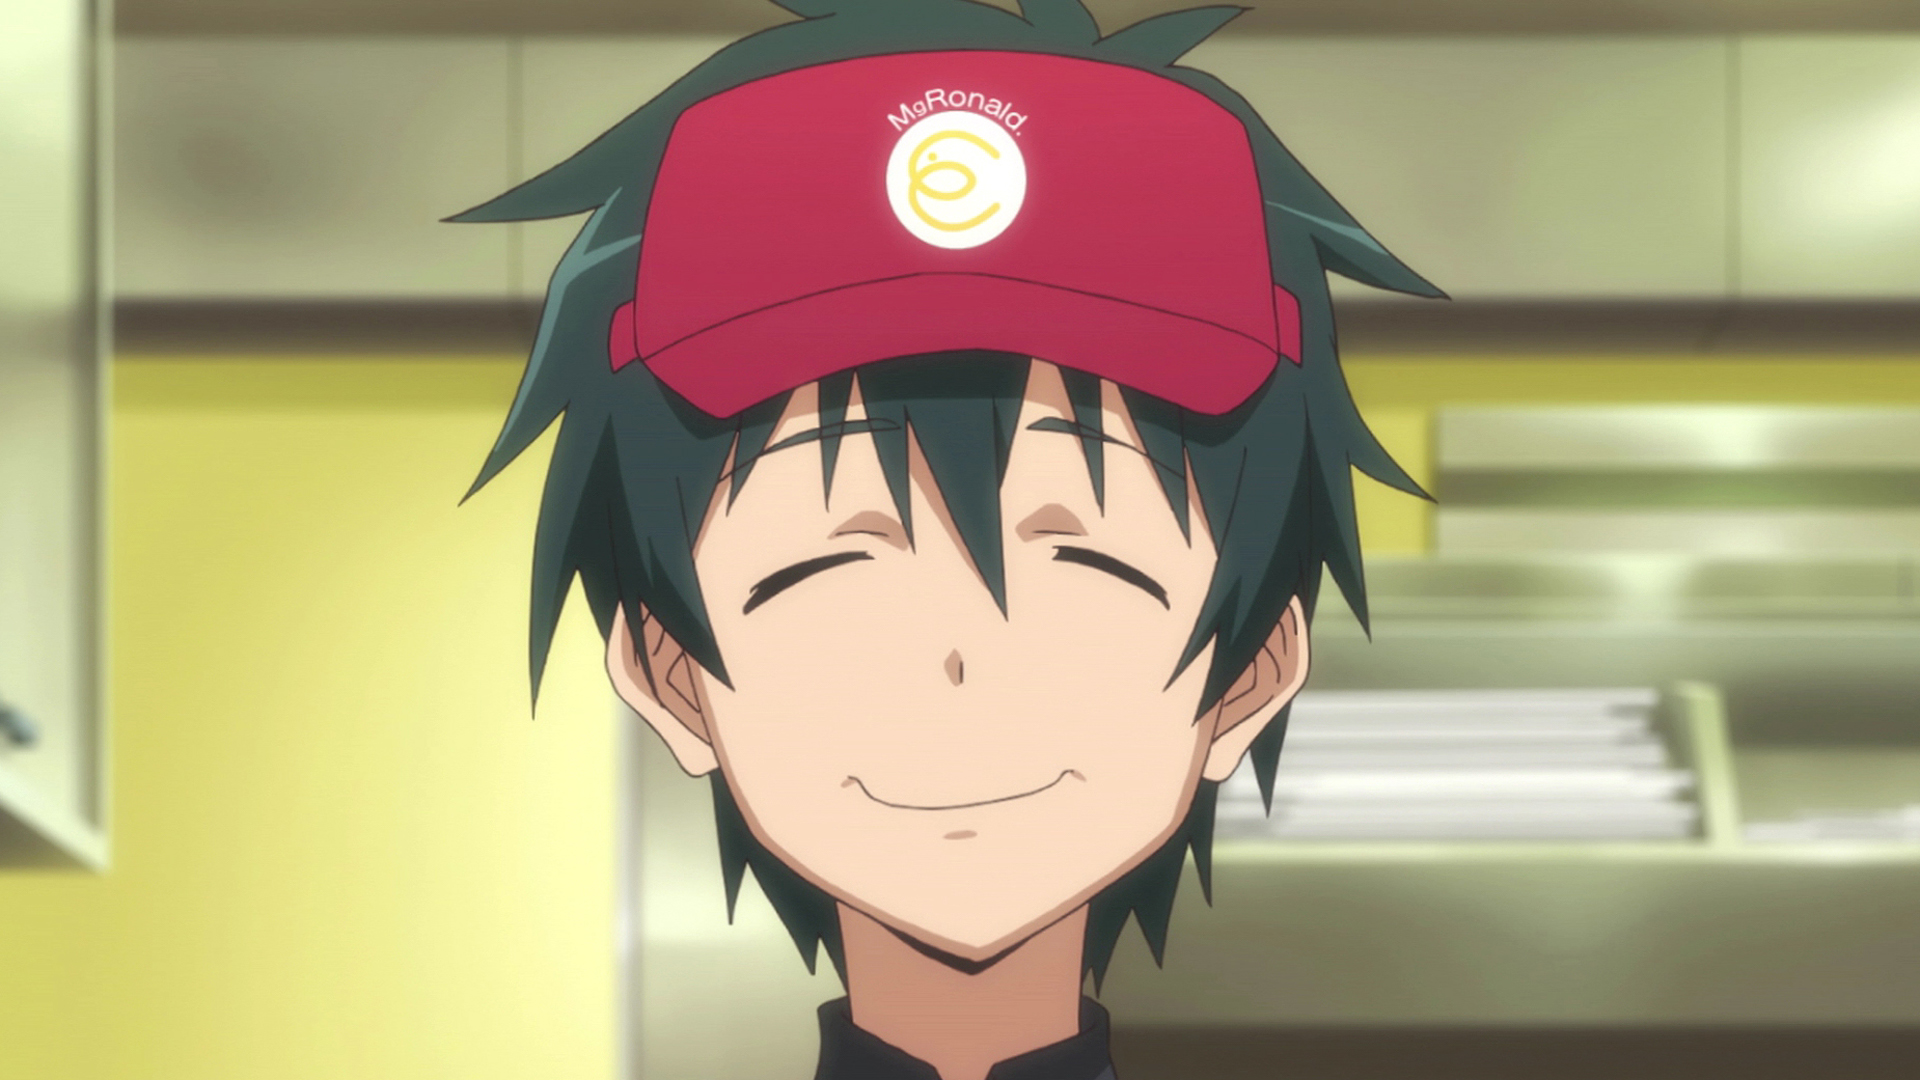 Amazing The Devil Is A Part-Timer! Pictures & Backgrounds